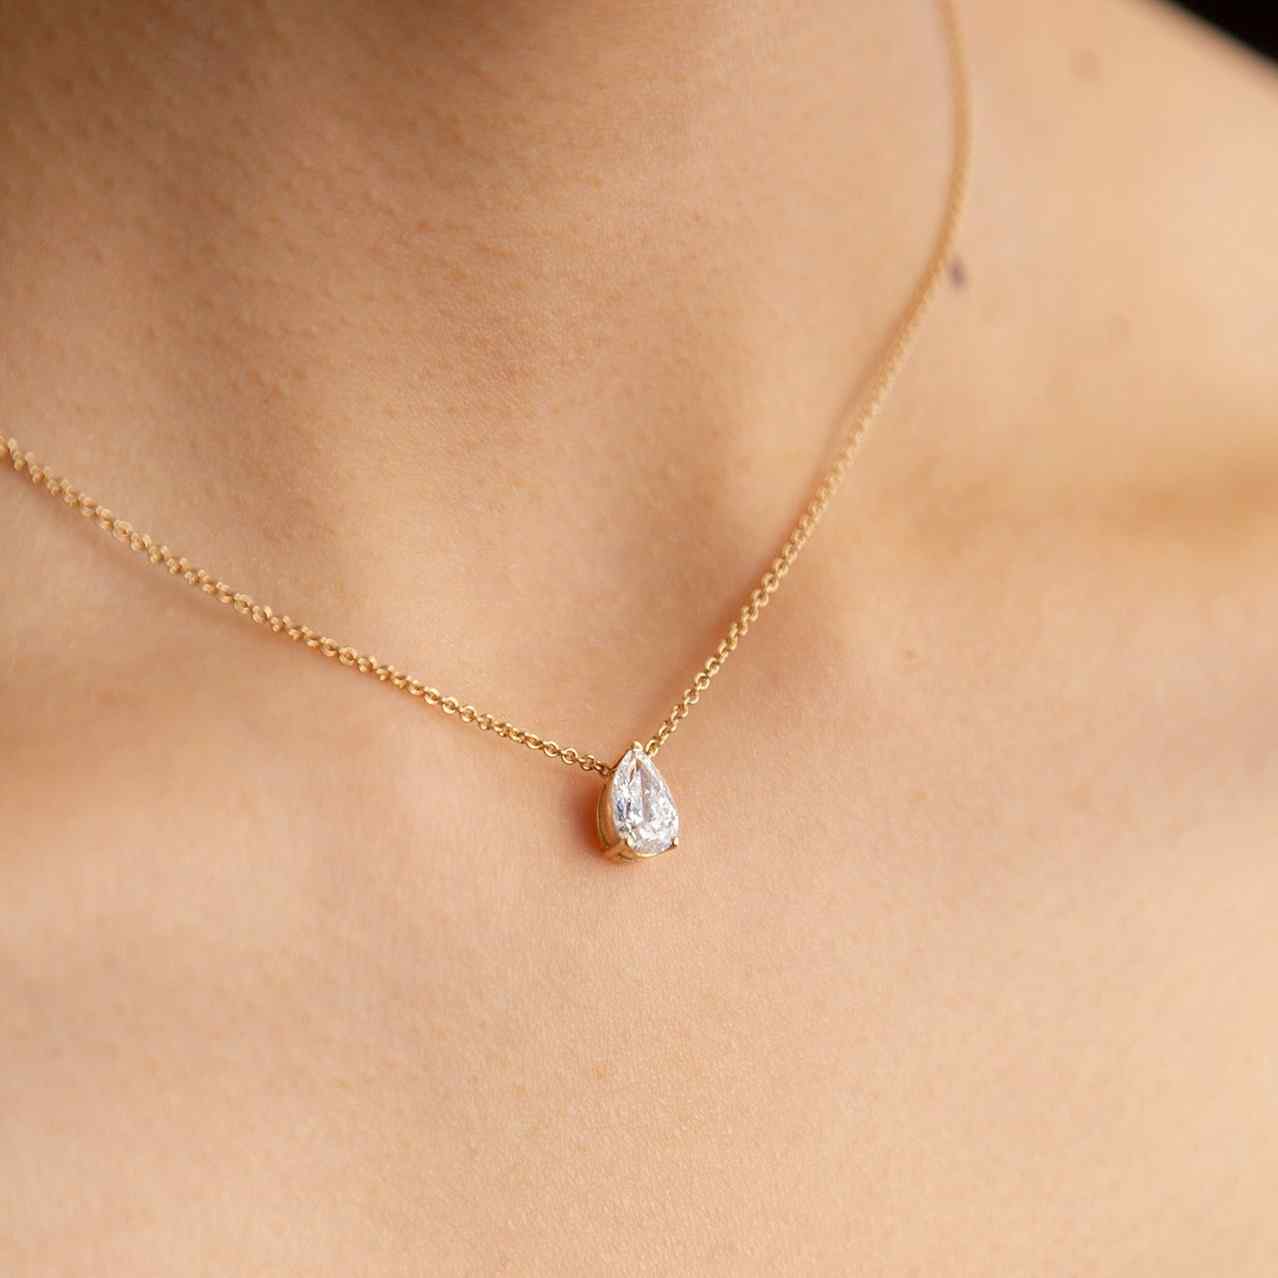 A model wears the Île Pear Necklace with a Yellow Gold setting and chain. A solitaire pear diamond is centered between the collarbone on an 18k gold chain. The length of this necklace is 16" (40cm). Please get in touch if you would like a different chain length. Shape, color, and size of this pear diamond necklace are fully customizable as well.